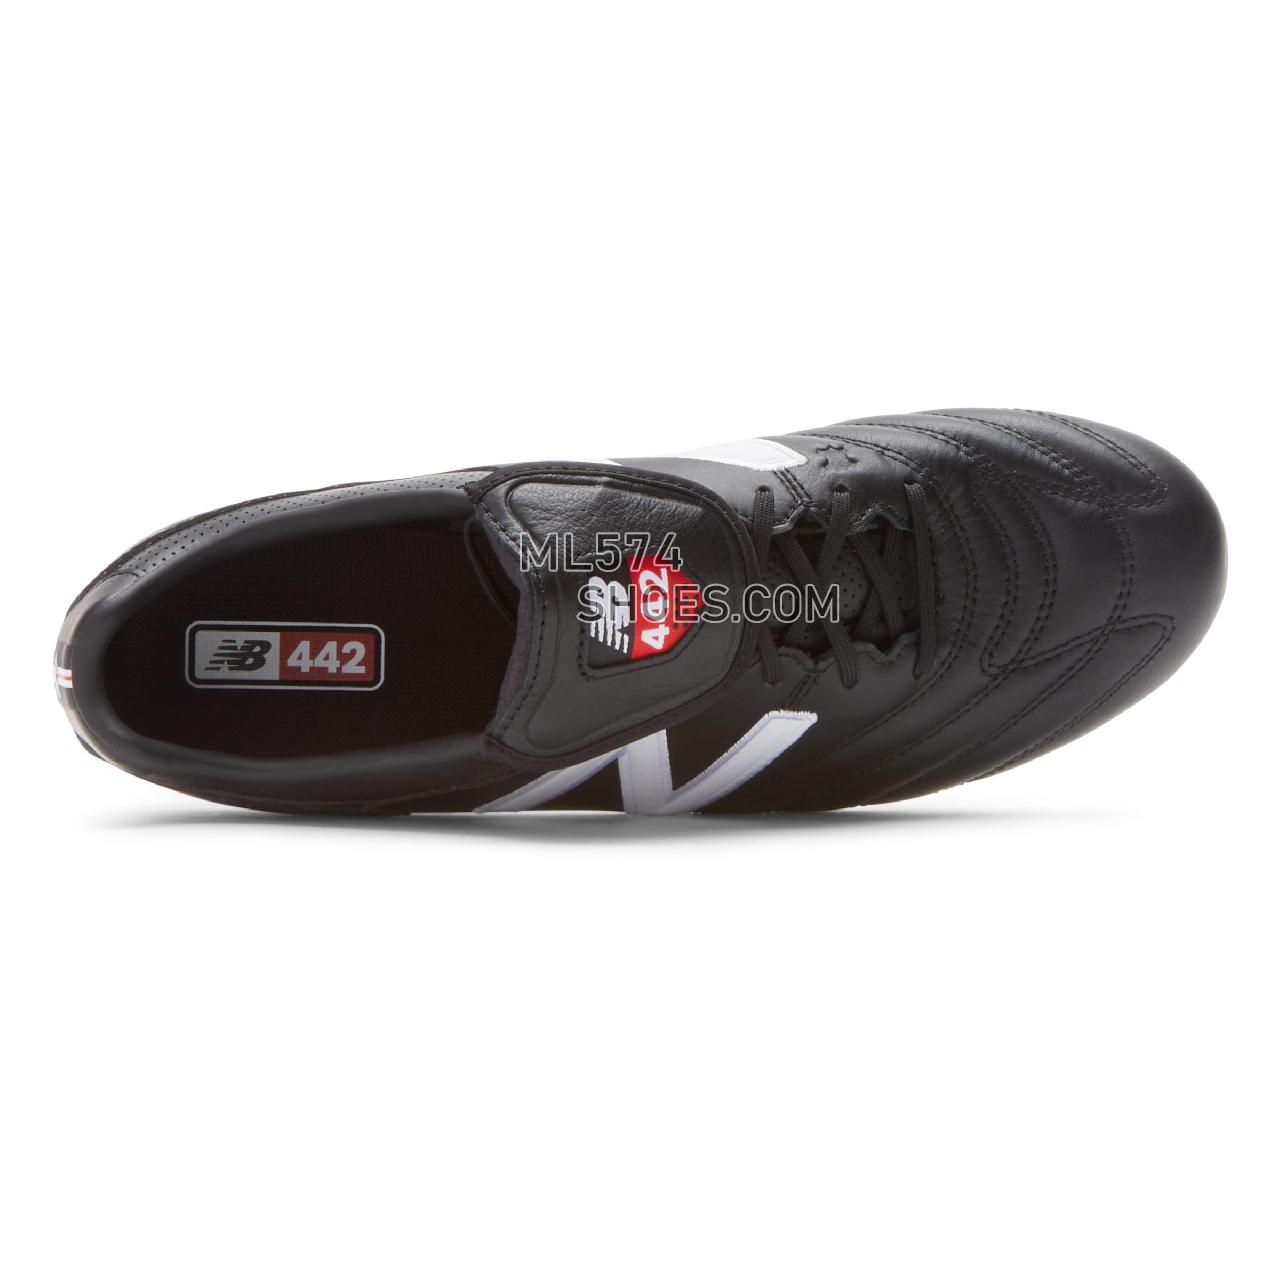 New Balance 442 Pro FG - Men's 1 - Soccer Black with White and Red - MSCKFBW1